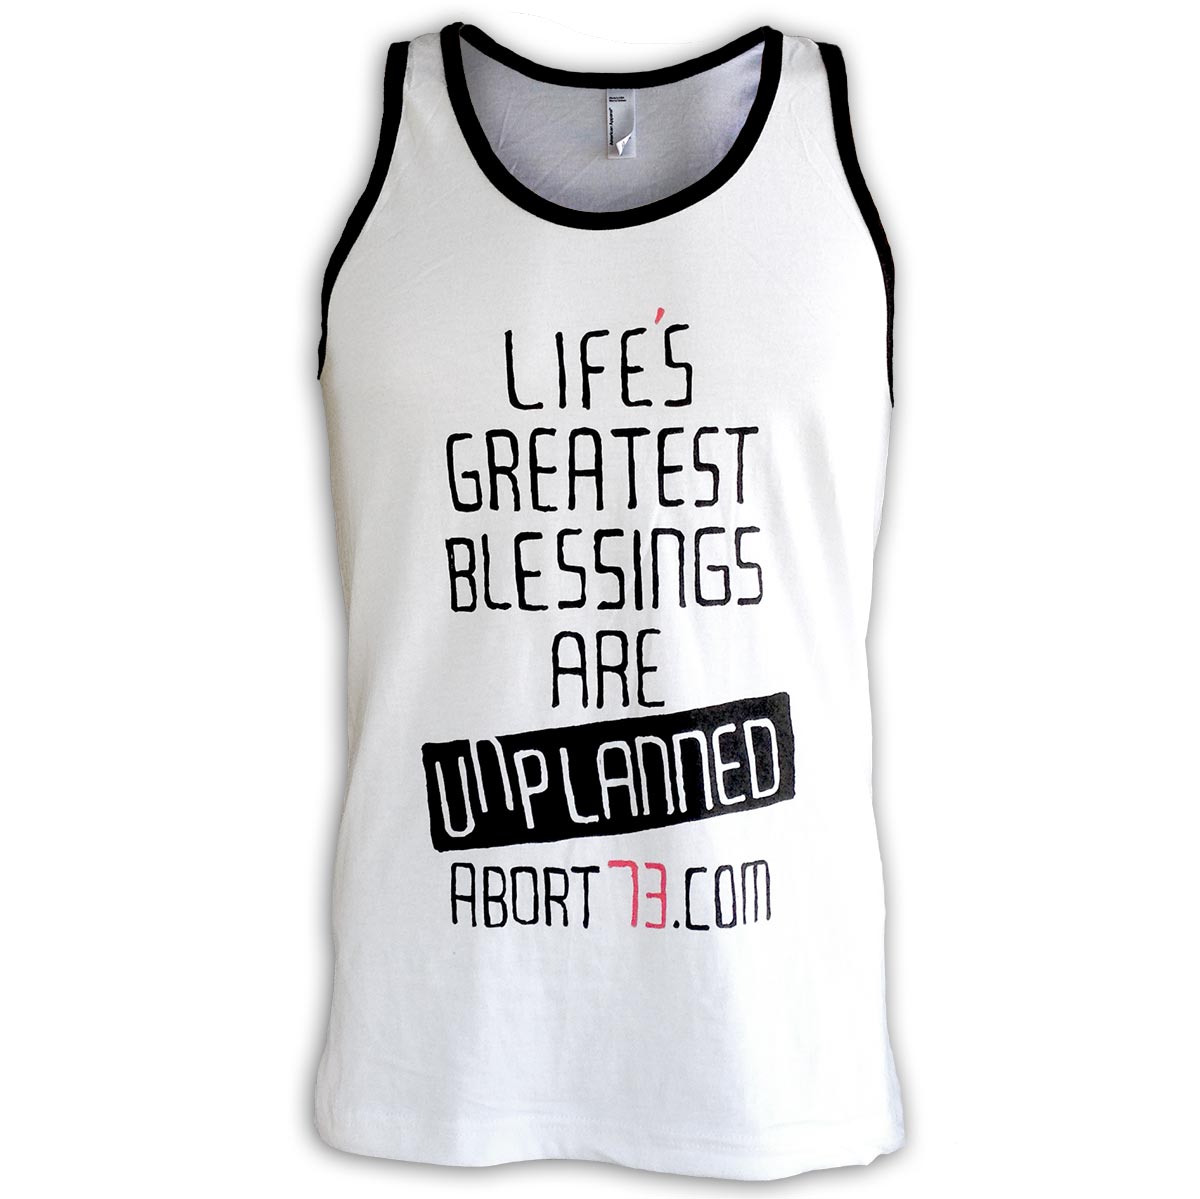 Life’s Greatest Blessings Are Unplanned (Abort73 Unisex Tank)